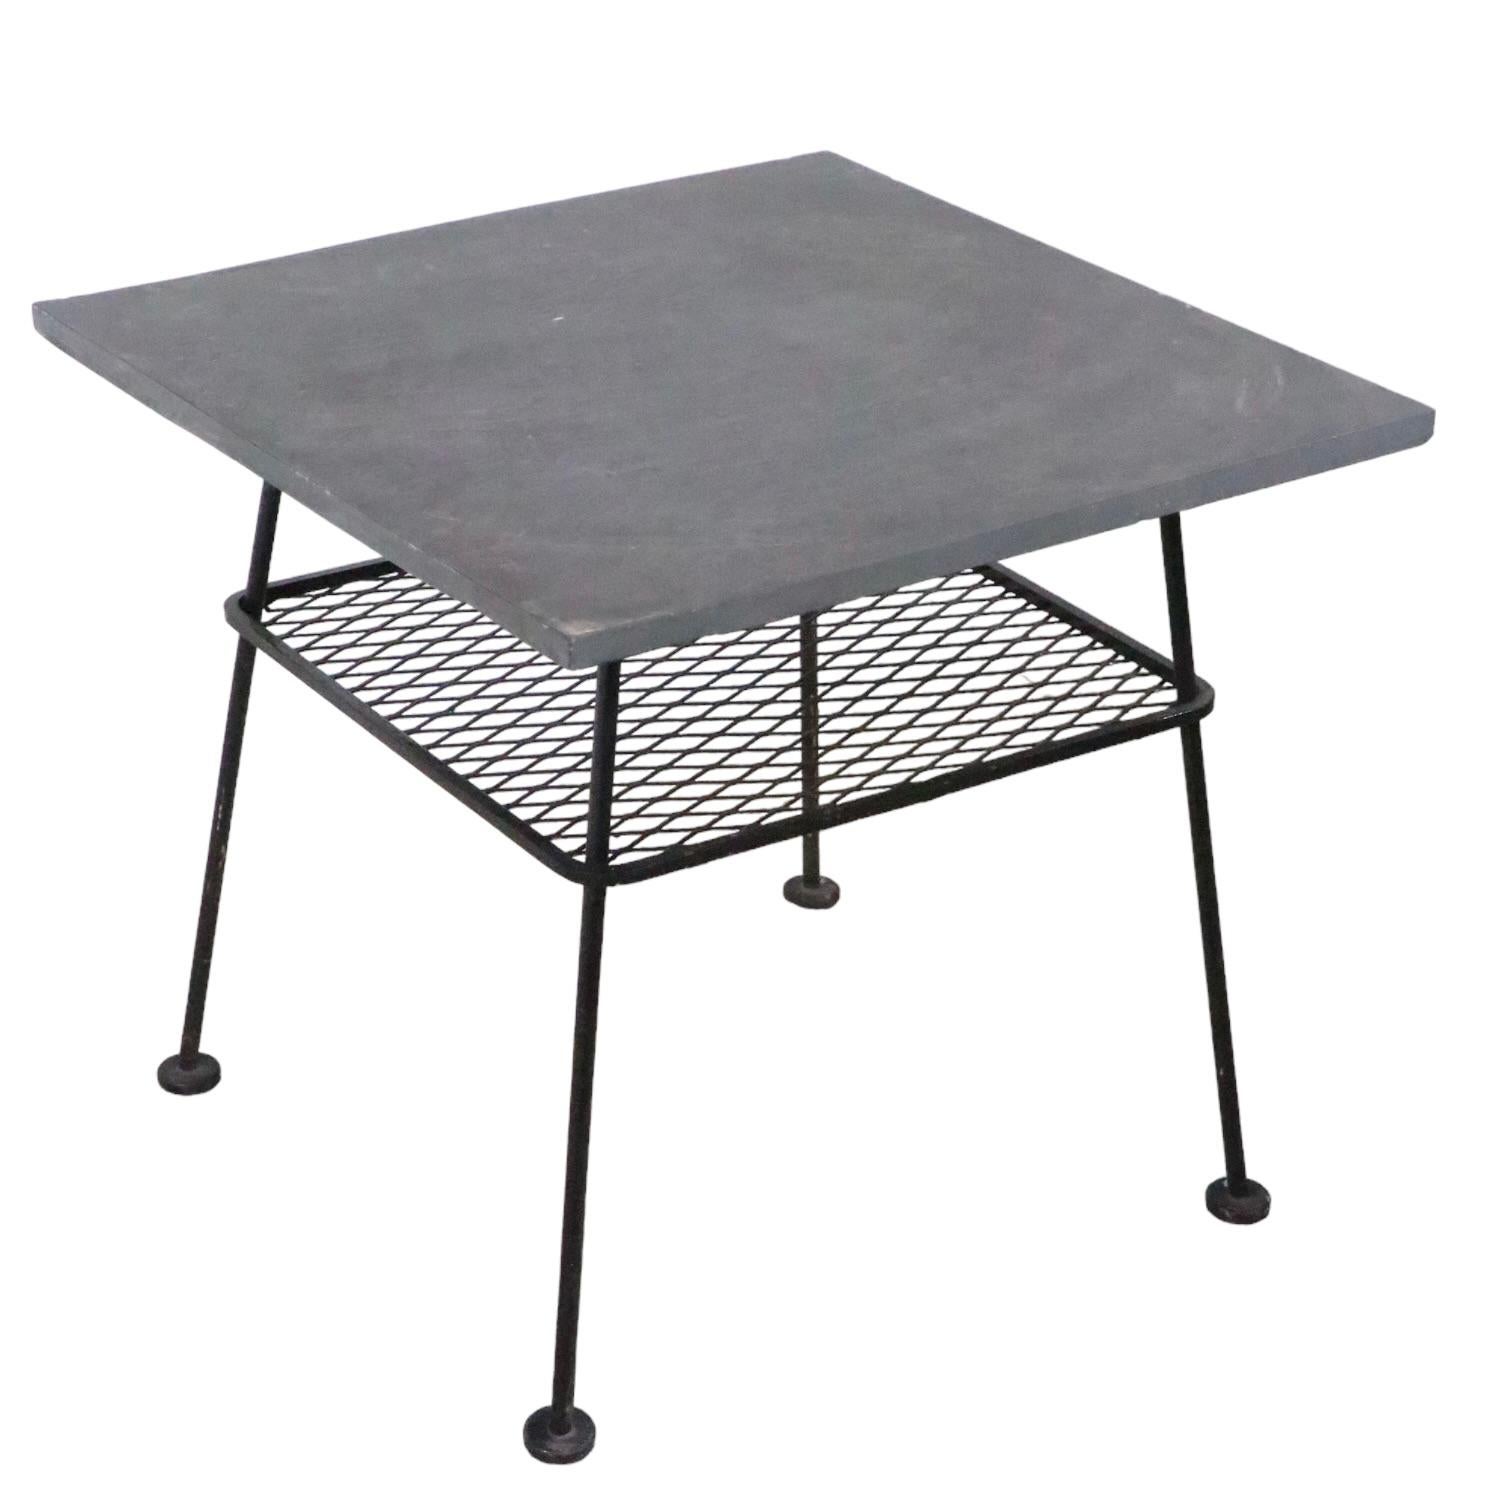 Wrought Iron and Slate Garden Patio, Sunroom Table After McCobb, Woodard, 1950s For Sale 2